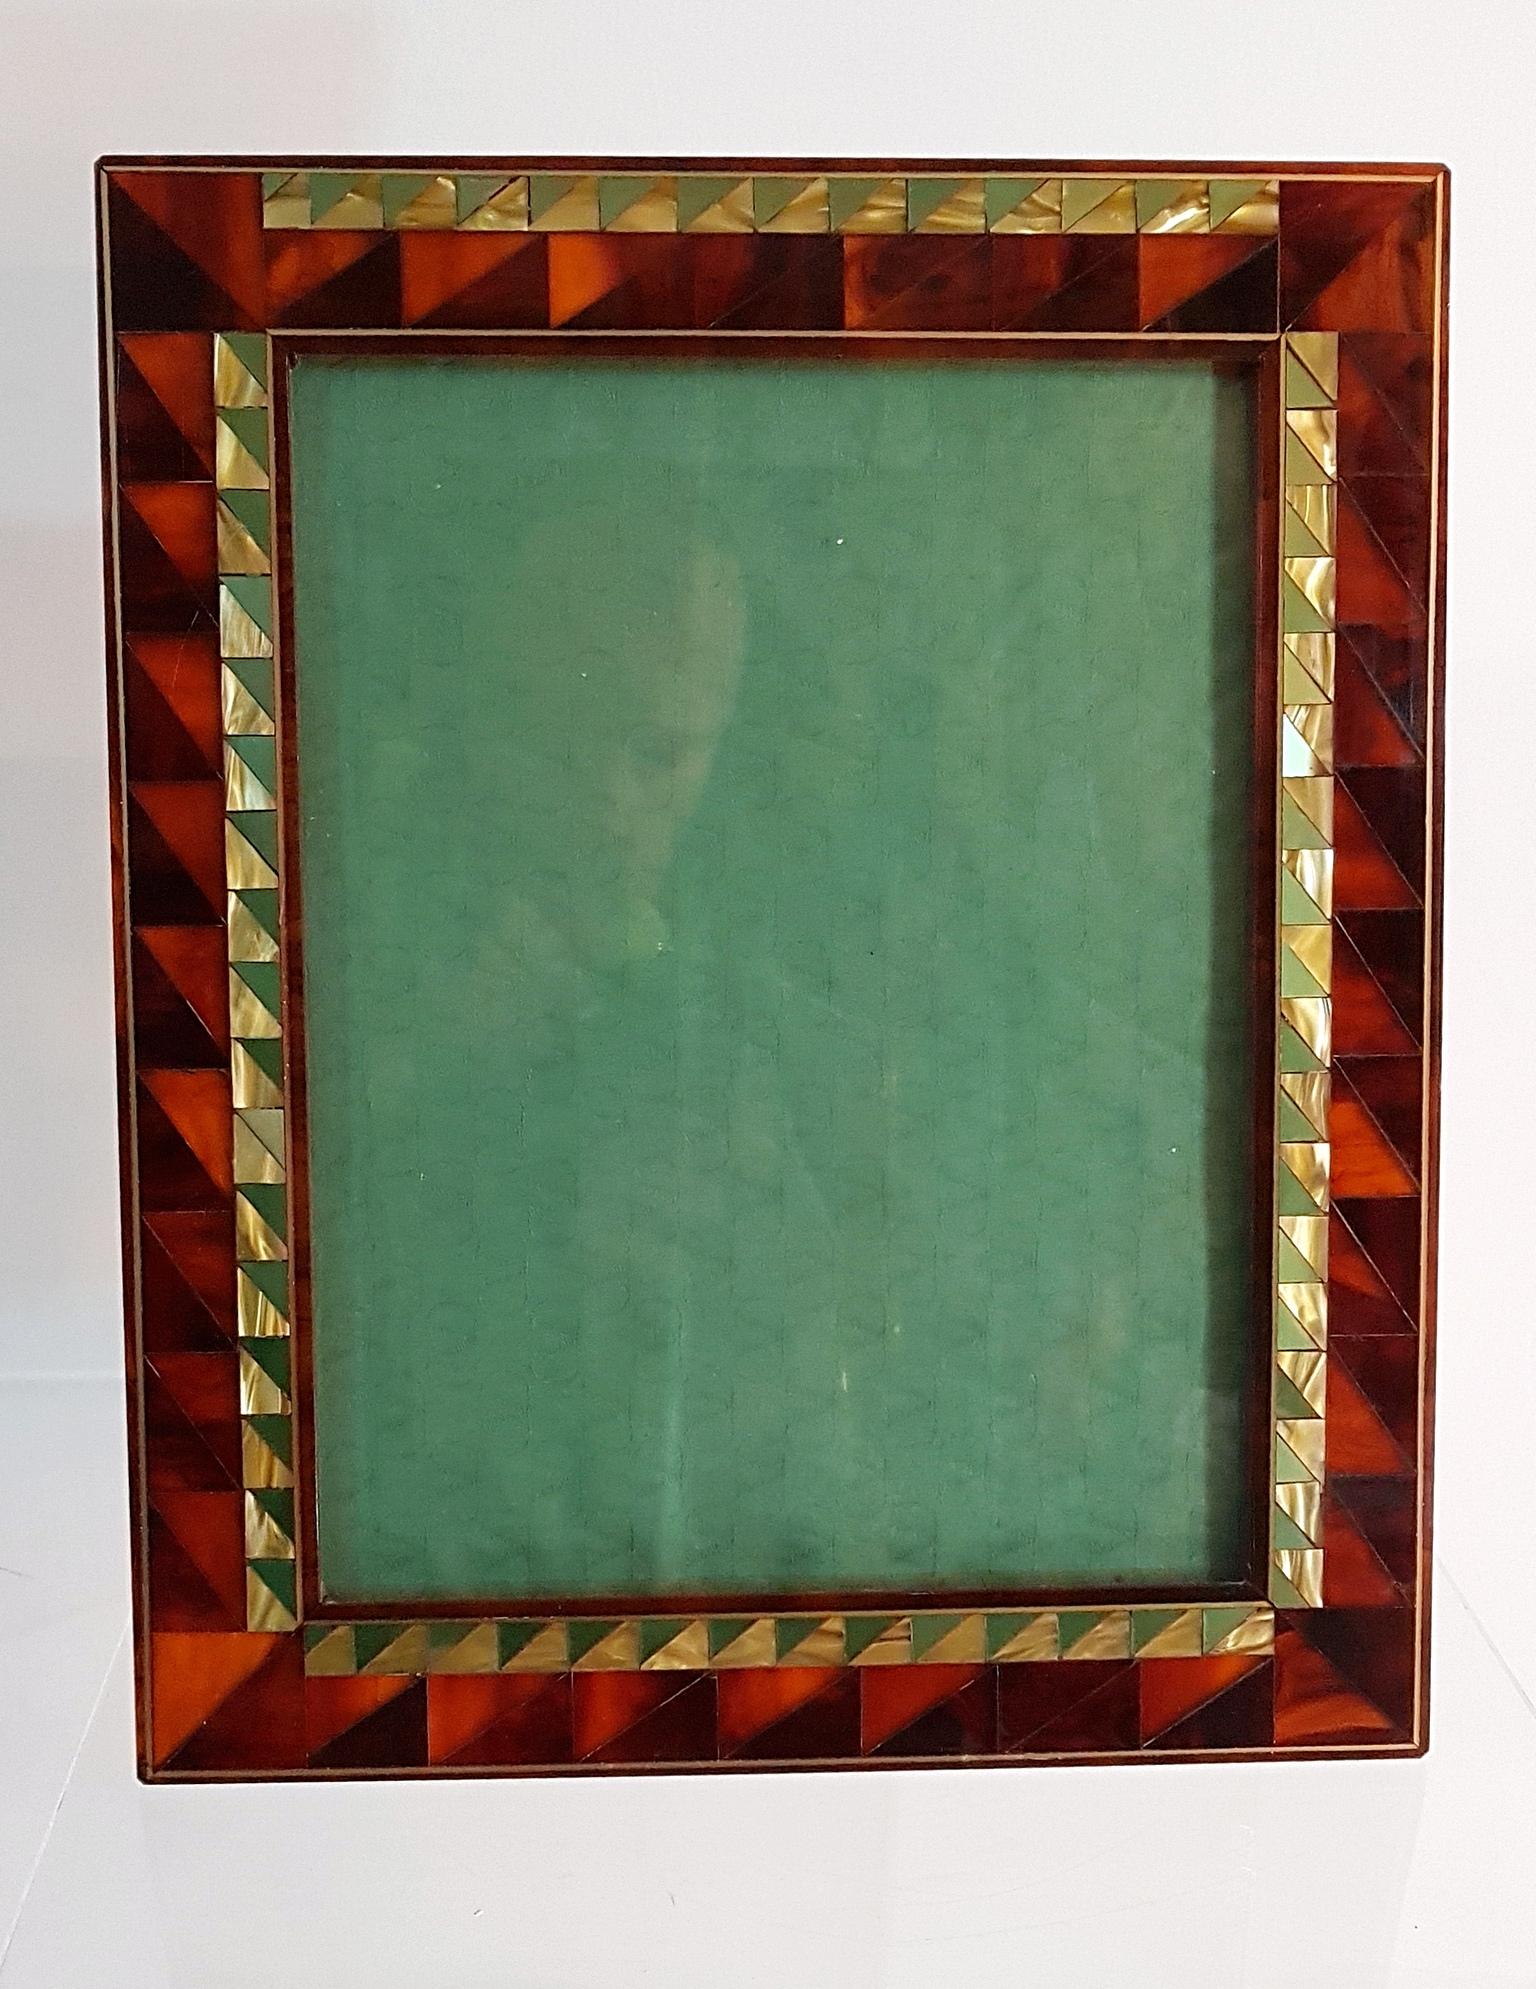 This listing is for 2 picture frames, described below: 

Art Deco style photo/picture frame in tortoiseshell lucite with triangular pattern of mother of pearl. Behind the glass there is a a green fabrick matching the green in the frame with the logo